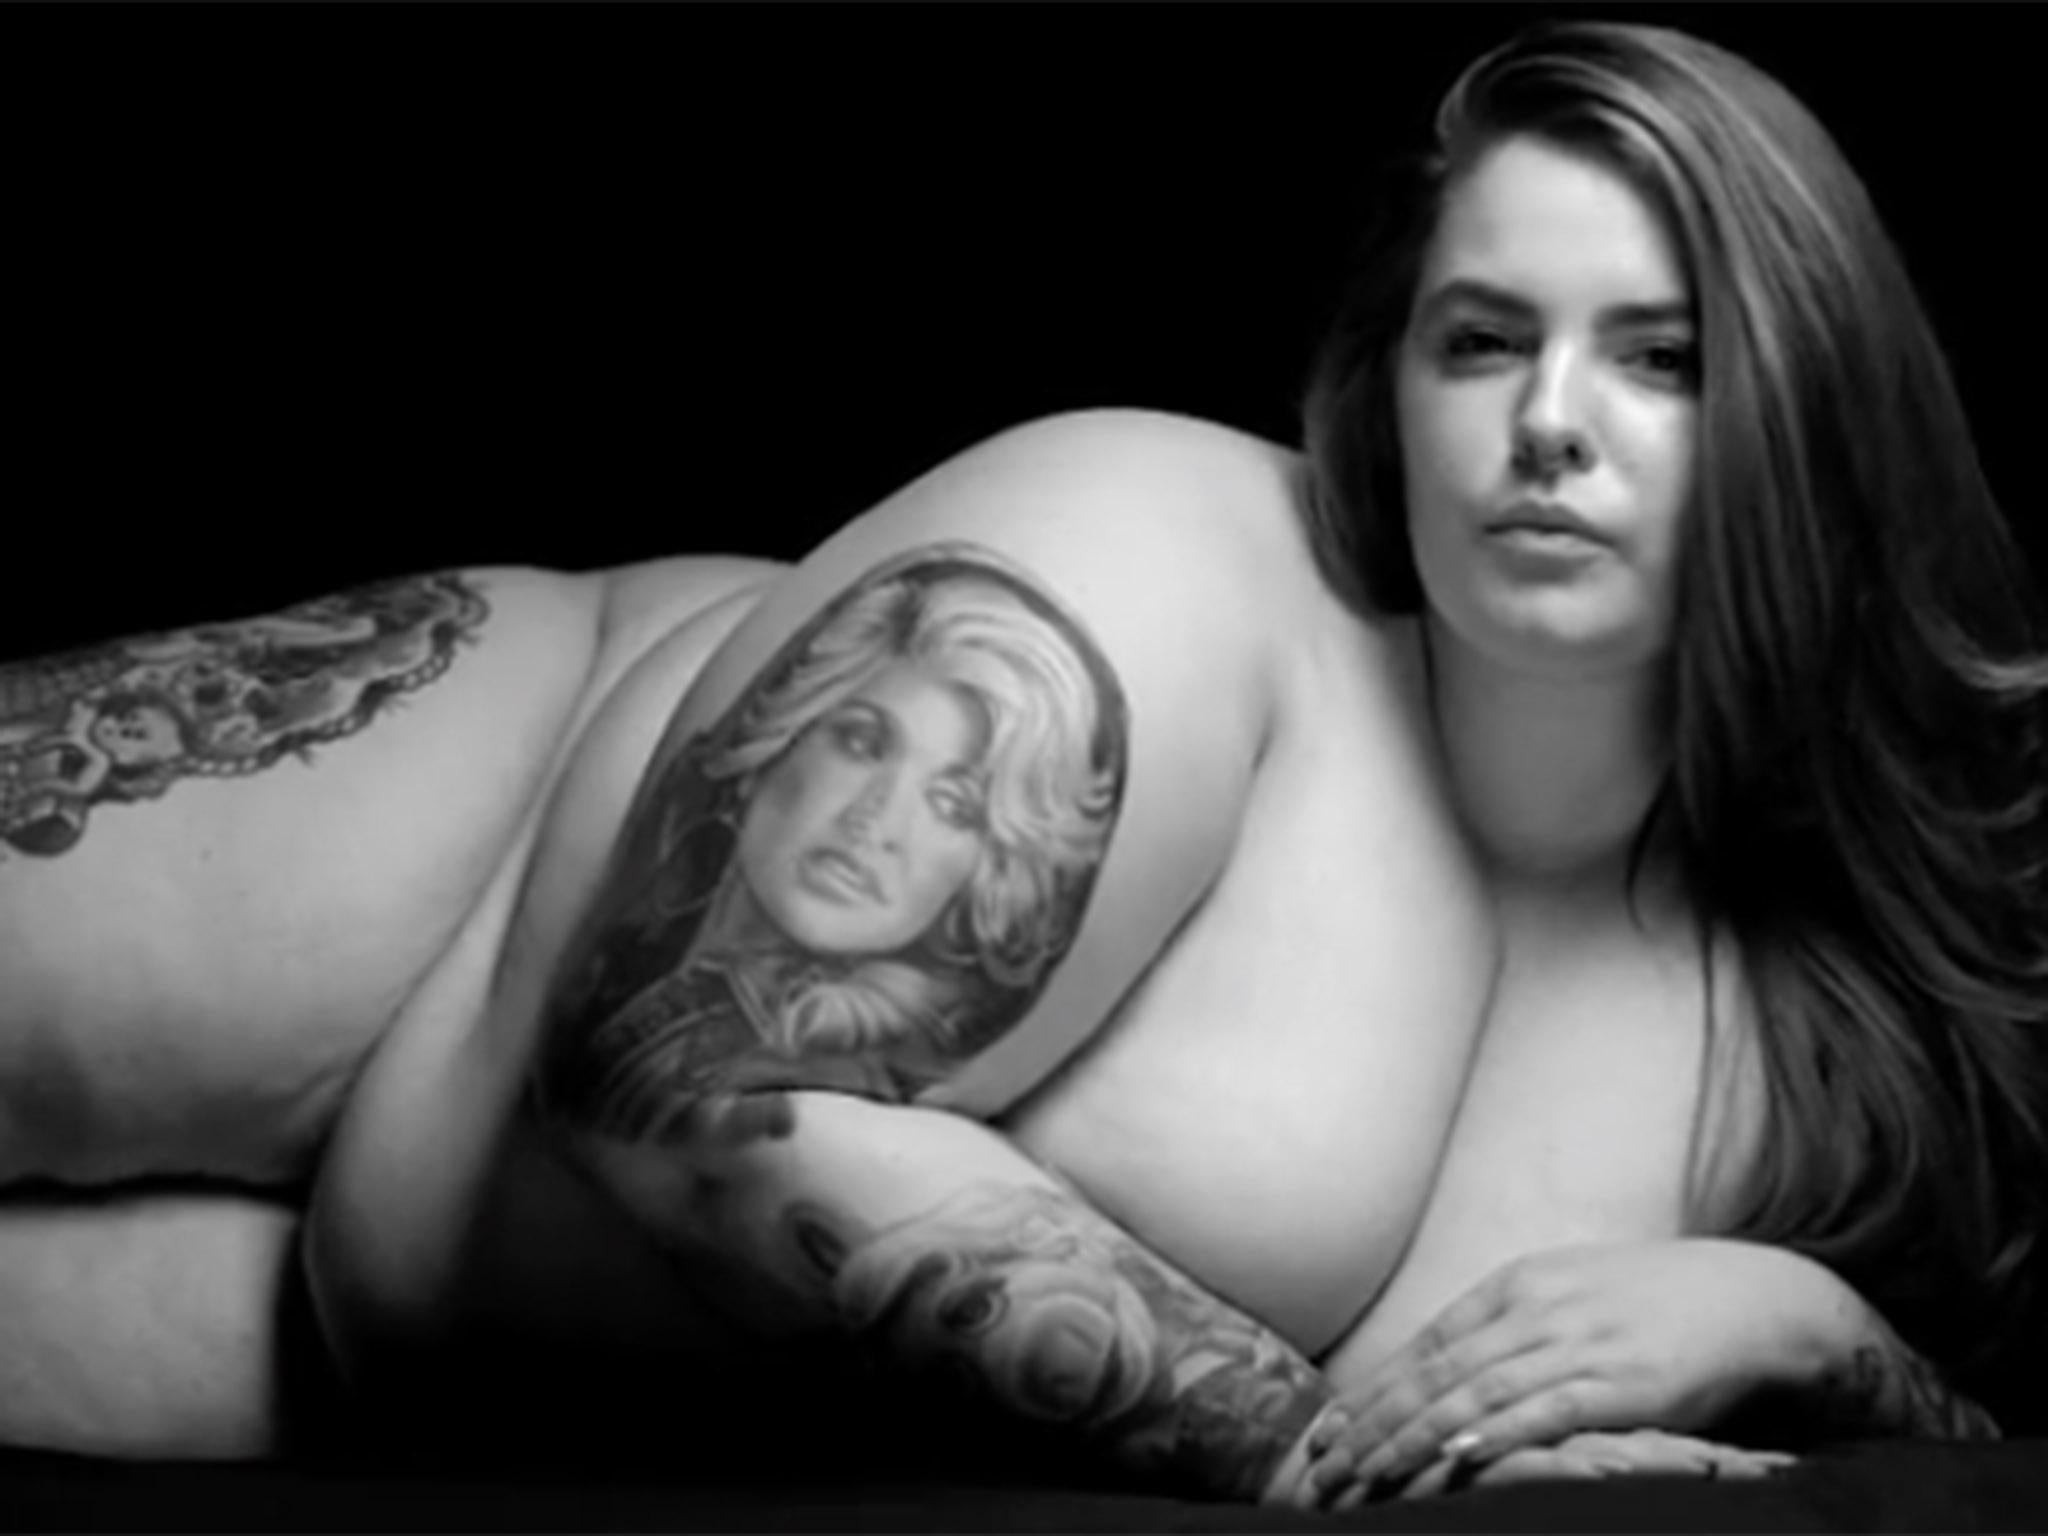 Tess Holliday poses nude and make-up free in a bid to destroy the power of objectification The Independent The Independent picture